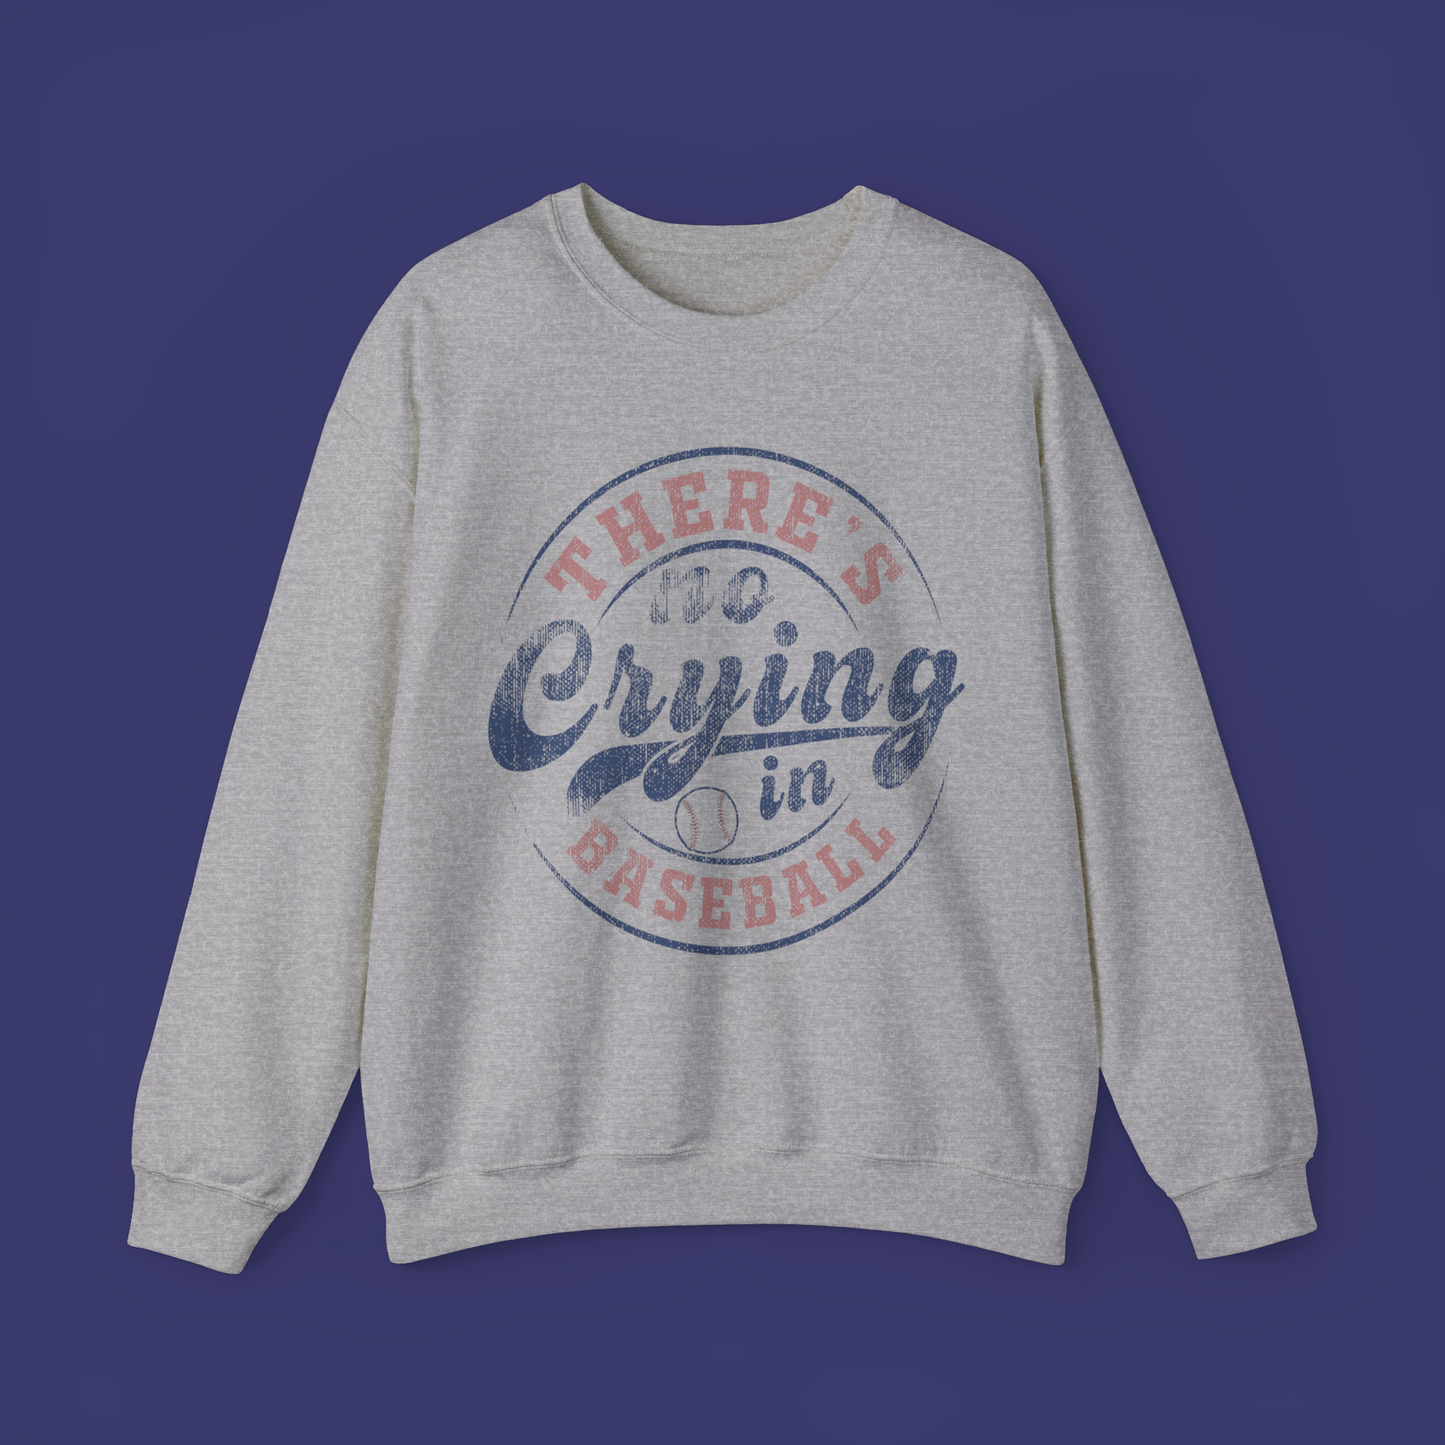 There's No Crying In Baseball Crewneck